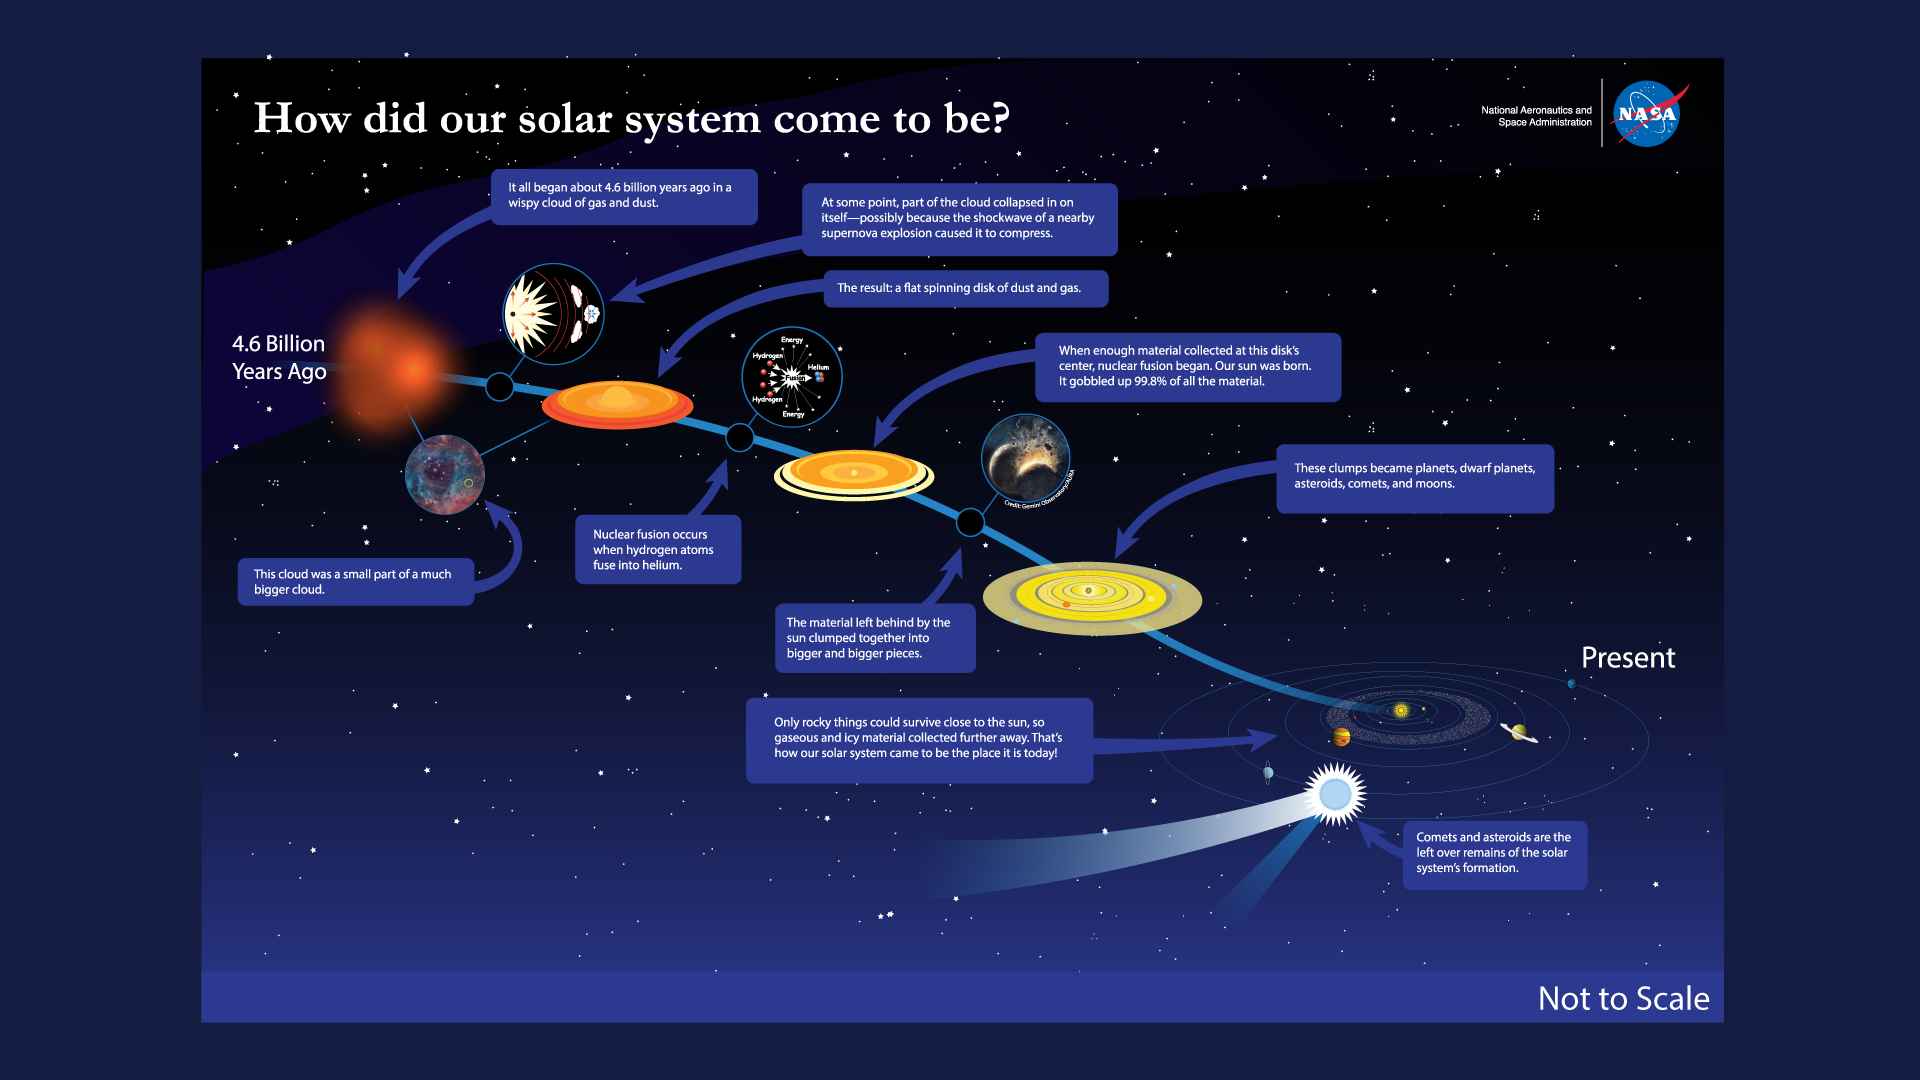 solar system formation theories worksheets